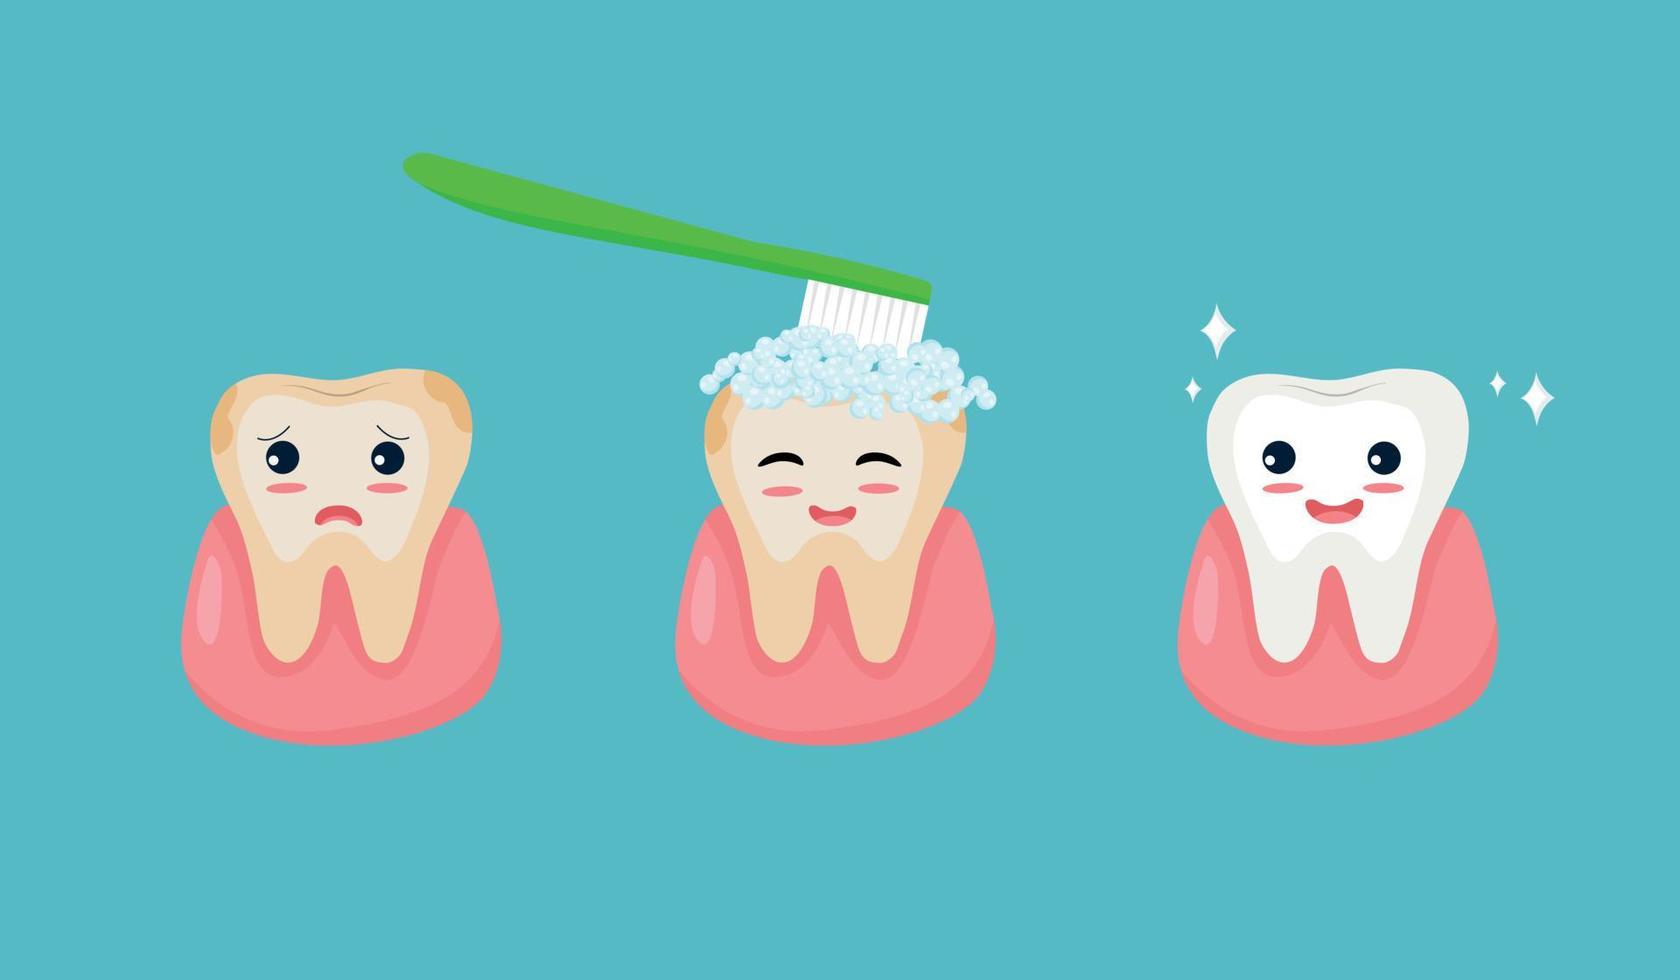 Cute tooth character showing stages of cleaning stained teeth to hygiene cleaned white tooth vector